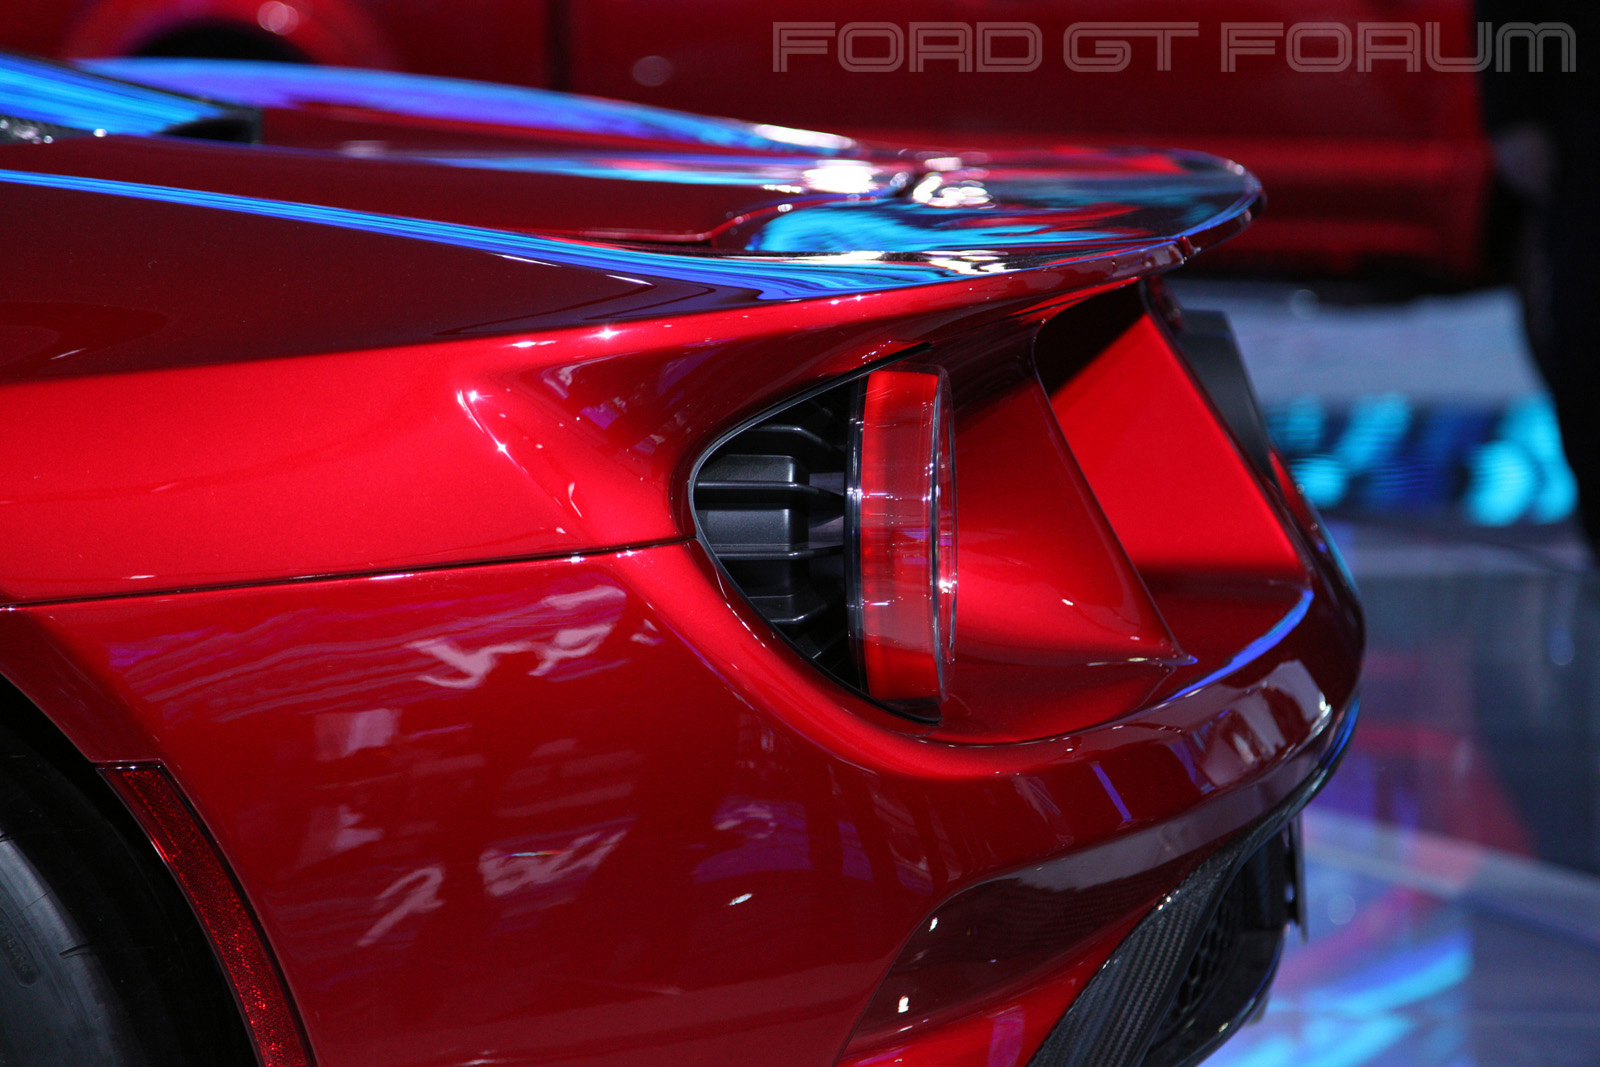 Ford-GT-Autoshow-3000-15